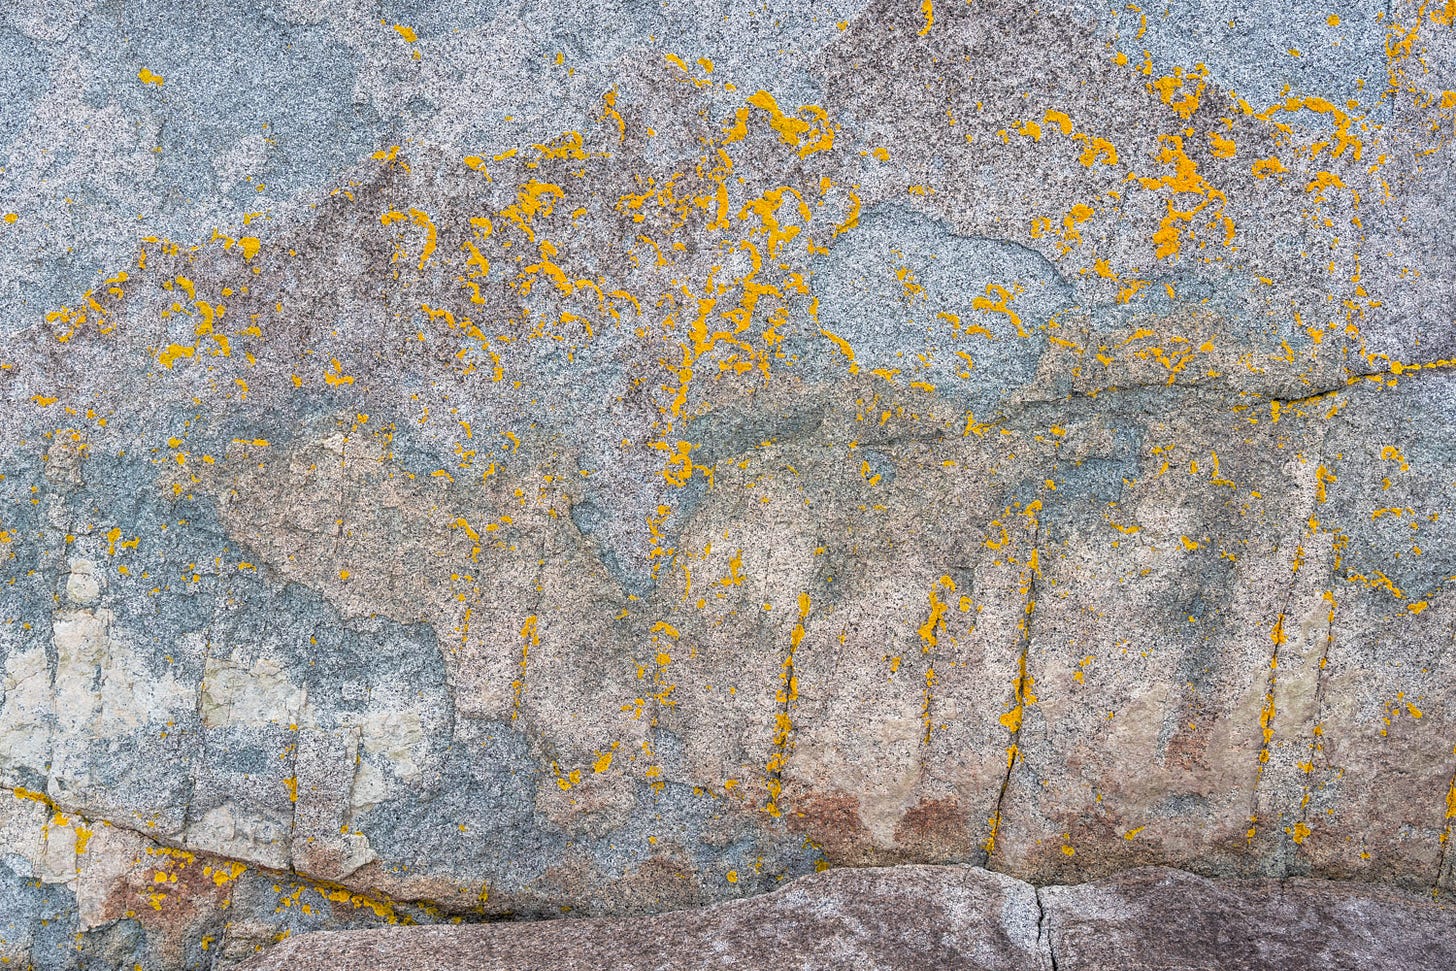 Lichen often mimics the structure of the substrate it grows on in Acadia National Park, Isle au Haut, Maine.